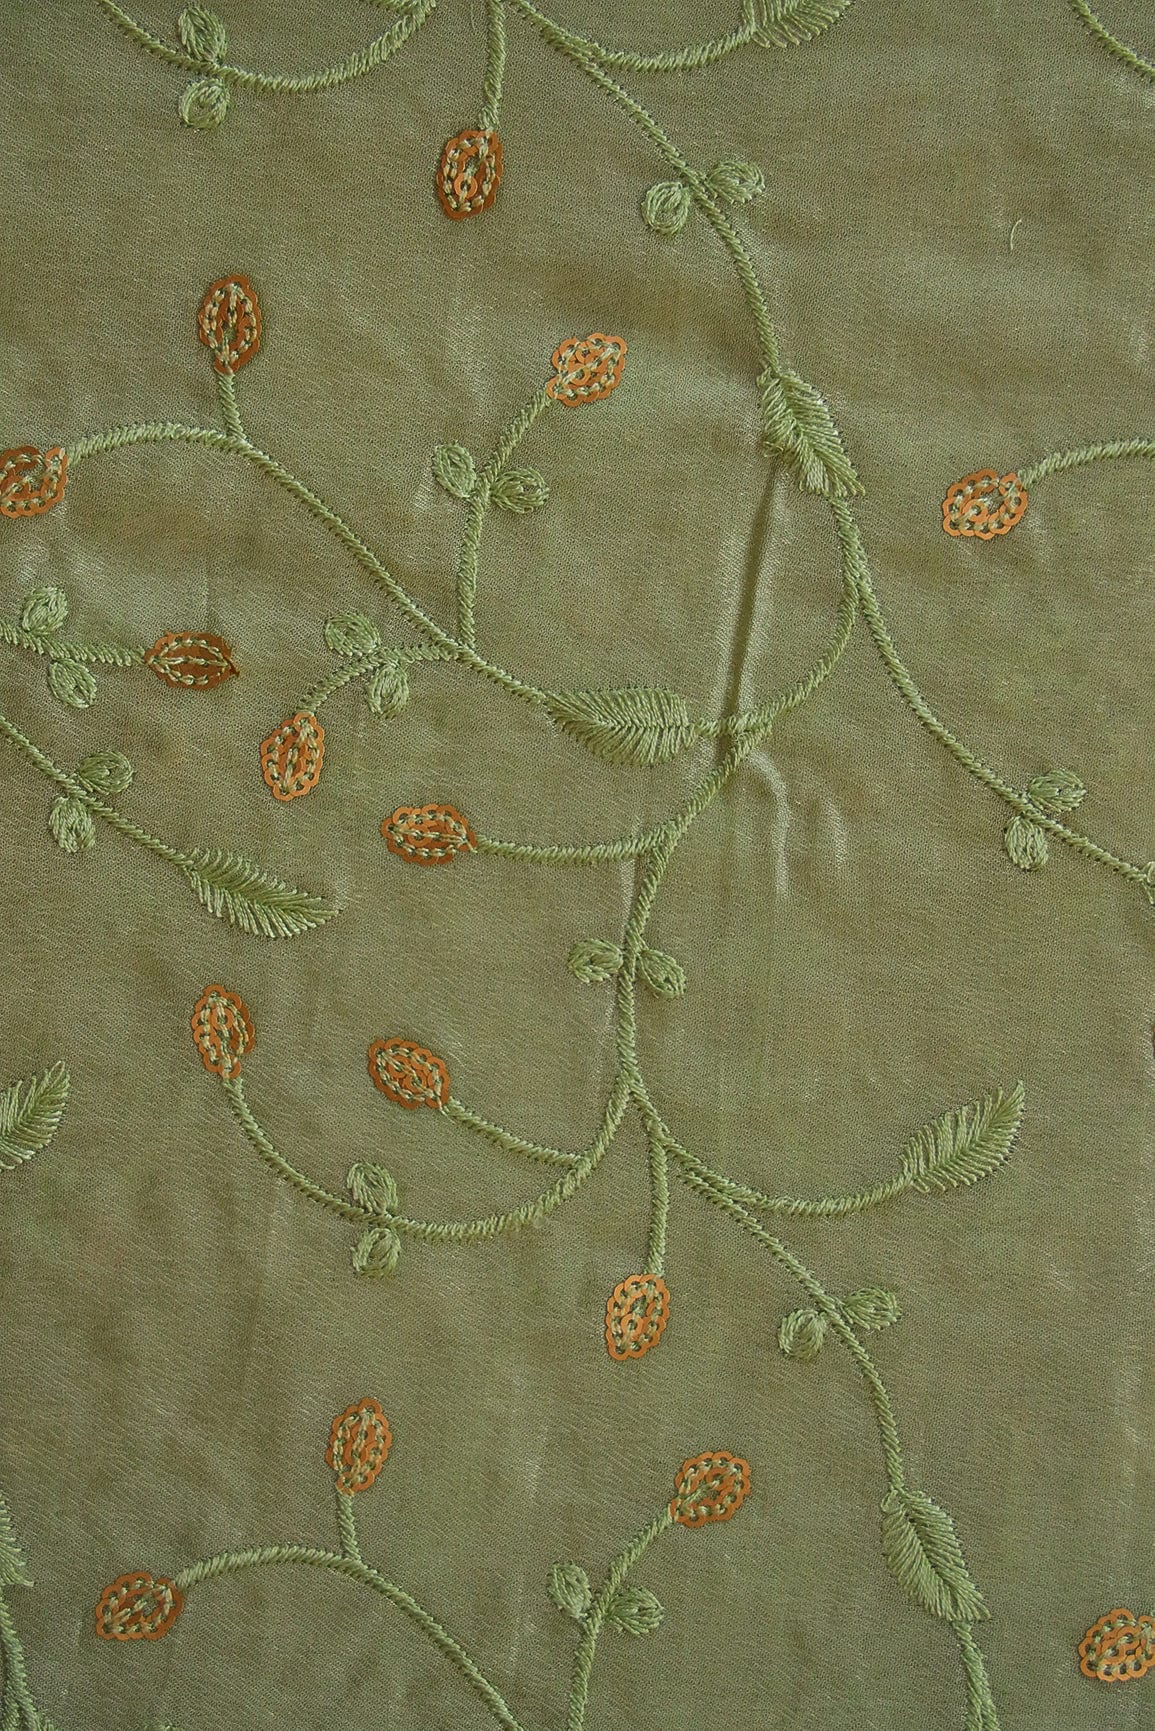 doeraa Embroidery Fabrics Leafy Gold Sequins With Olive Thread Embroidery Work On Olive Chinnon Chiffon Fabric